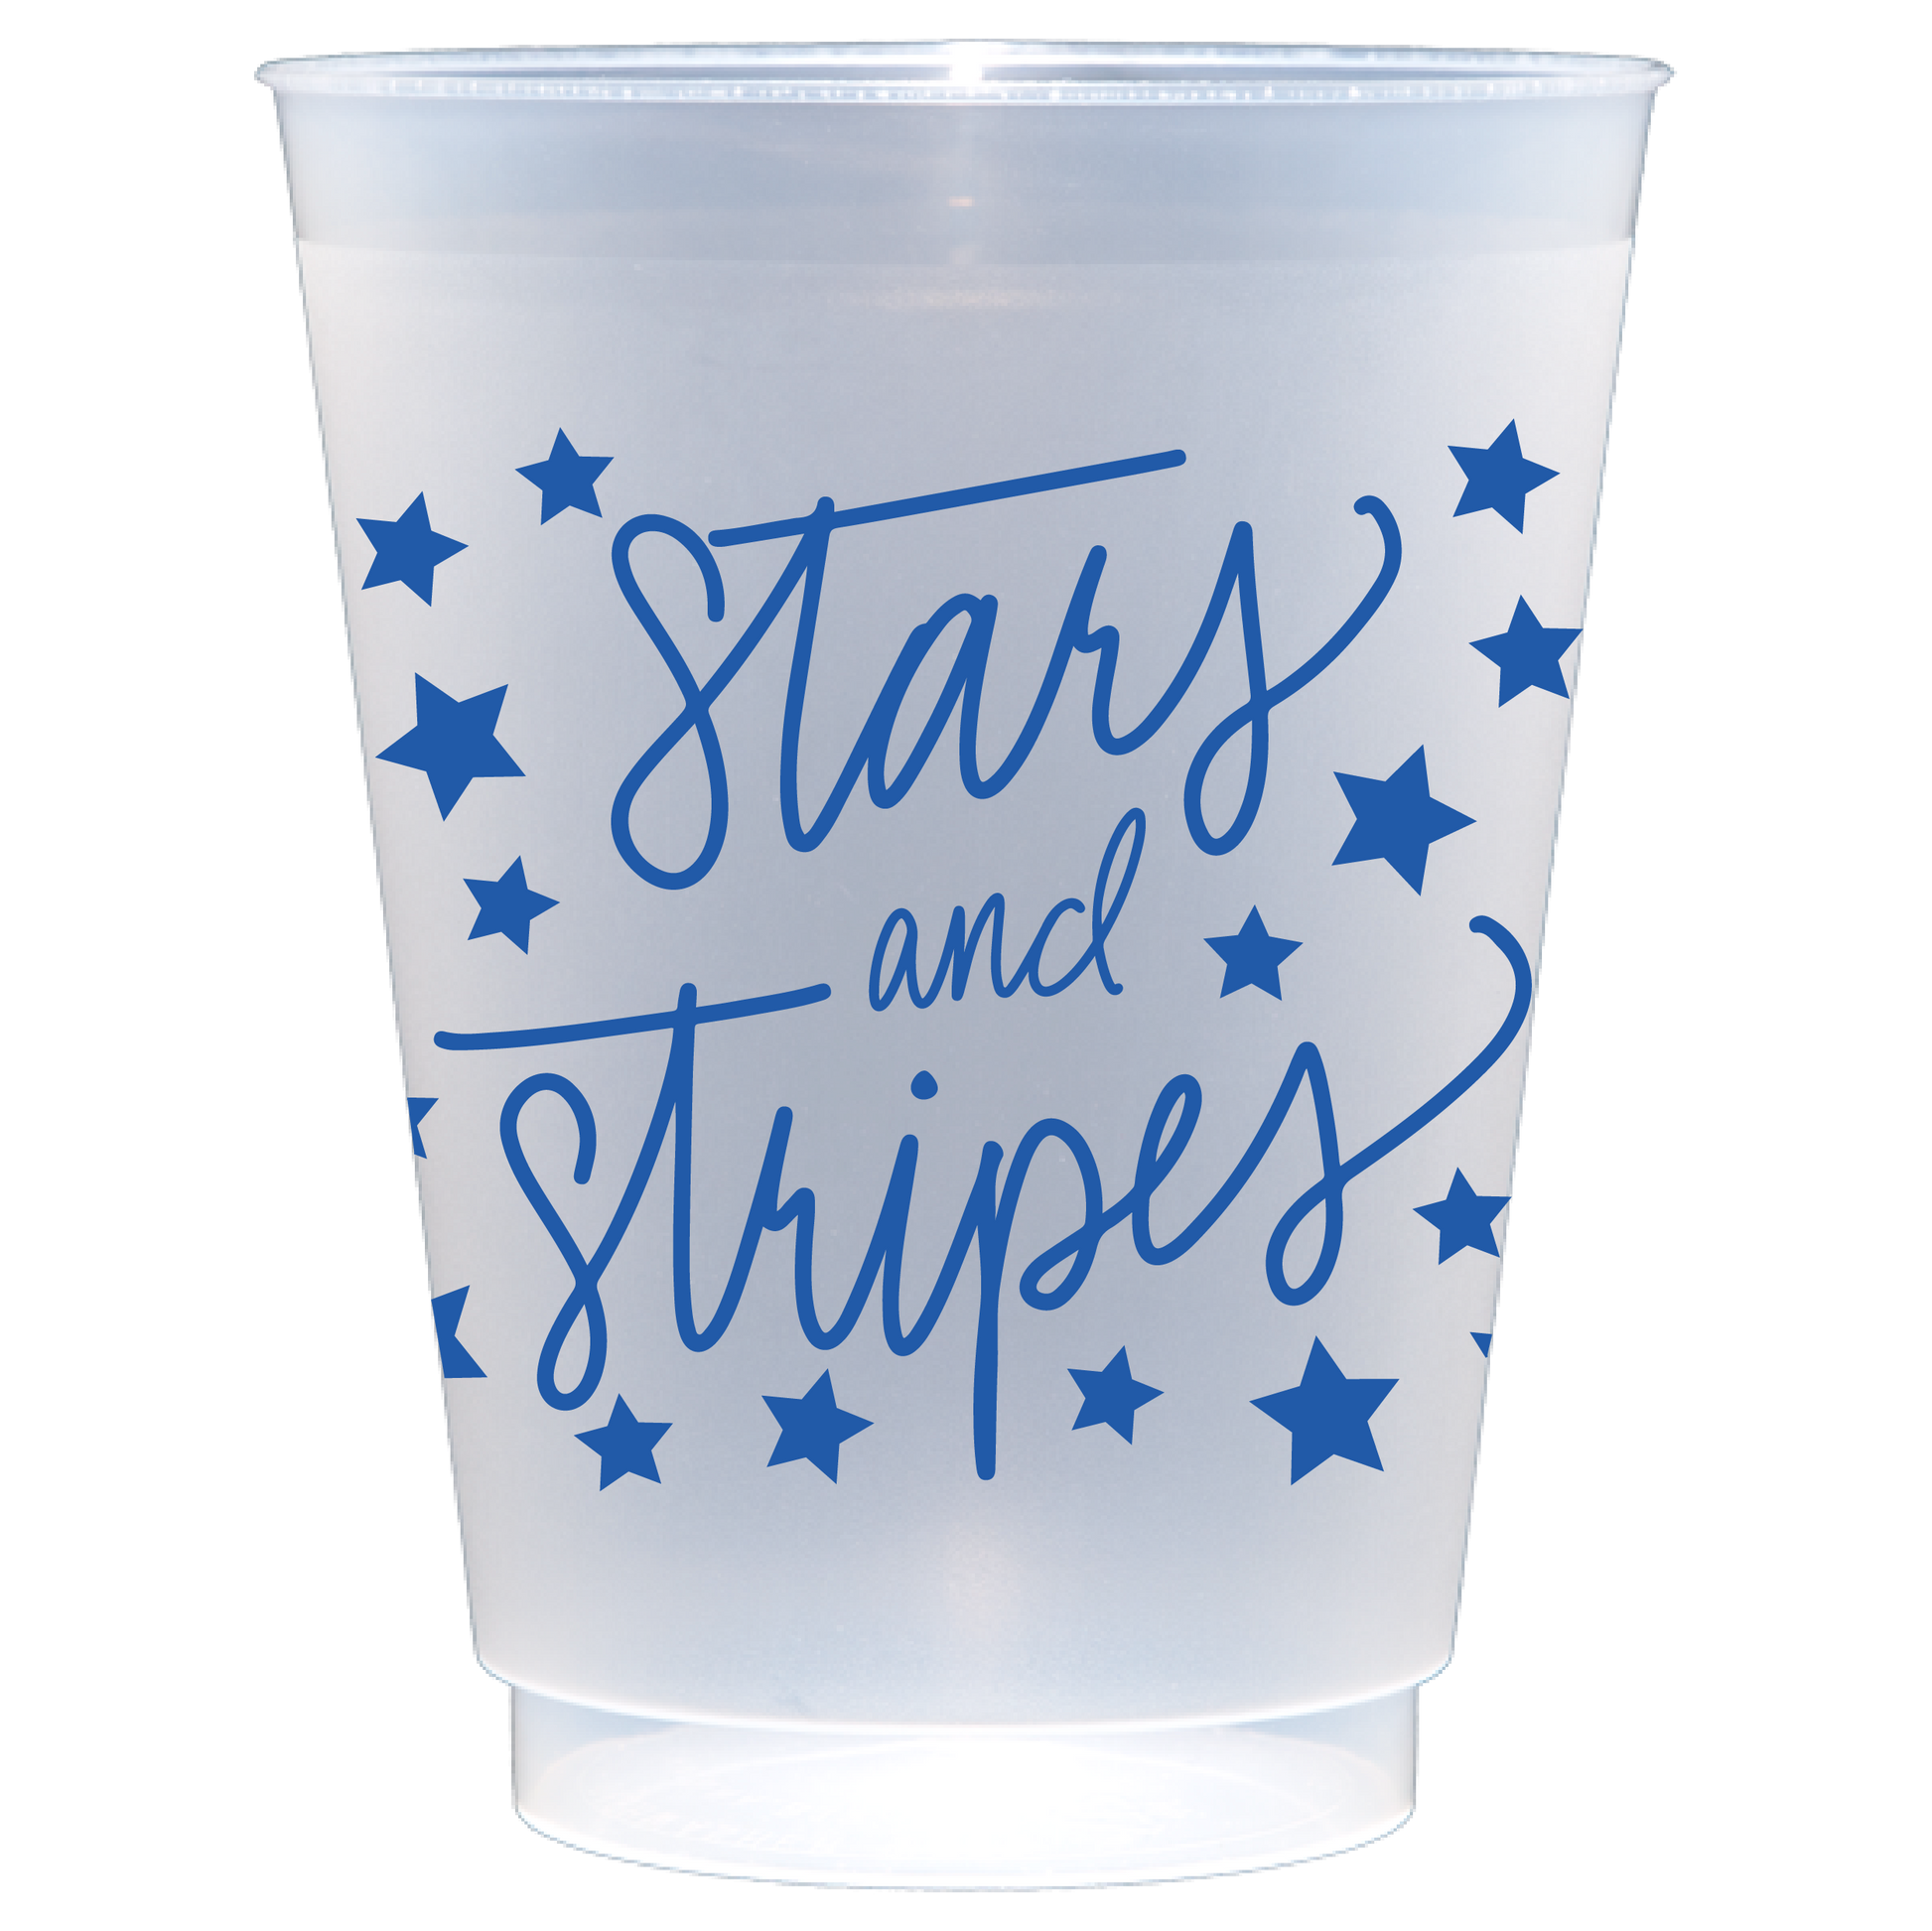 Fourth of July and Memorial Day celebrations with our Stars & Stripes Party Cups